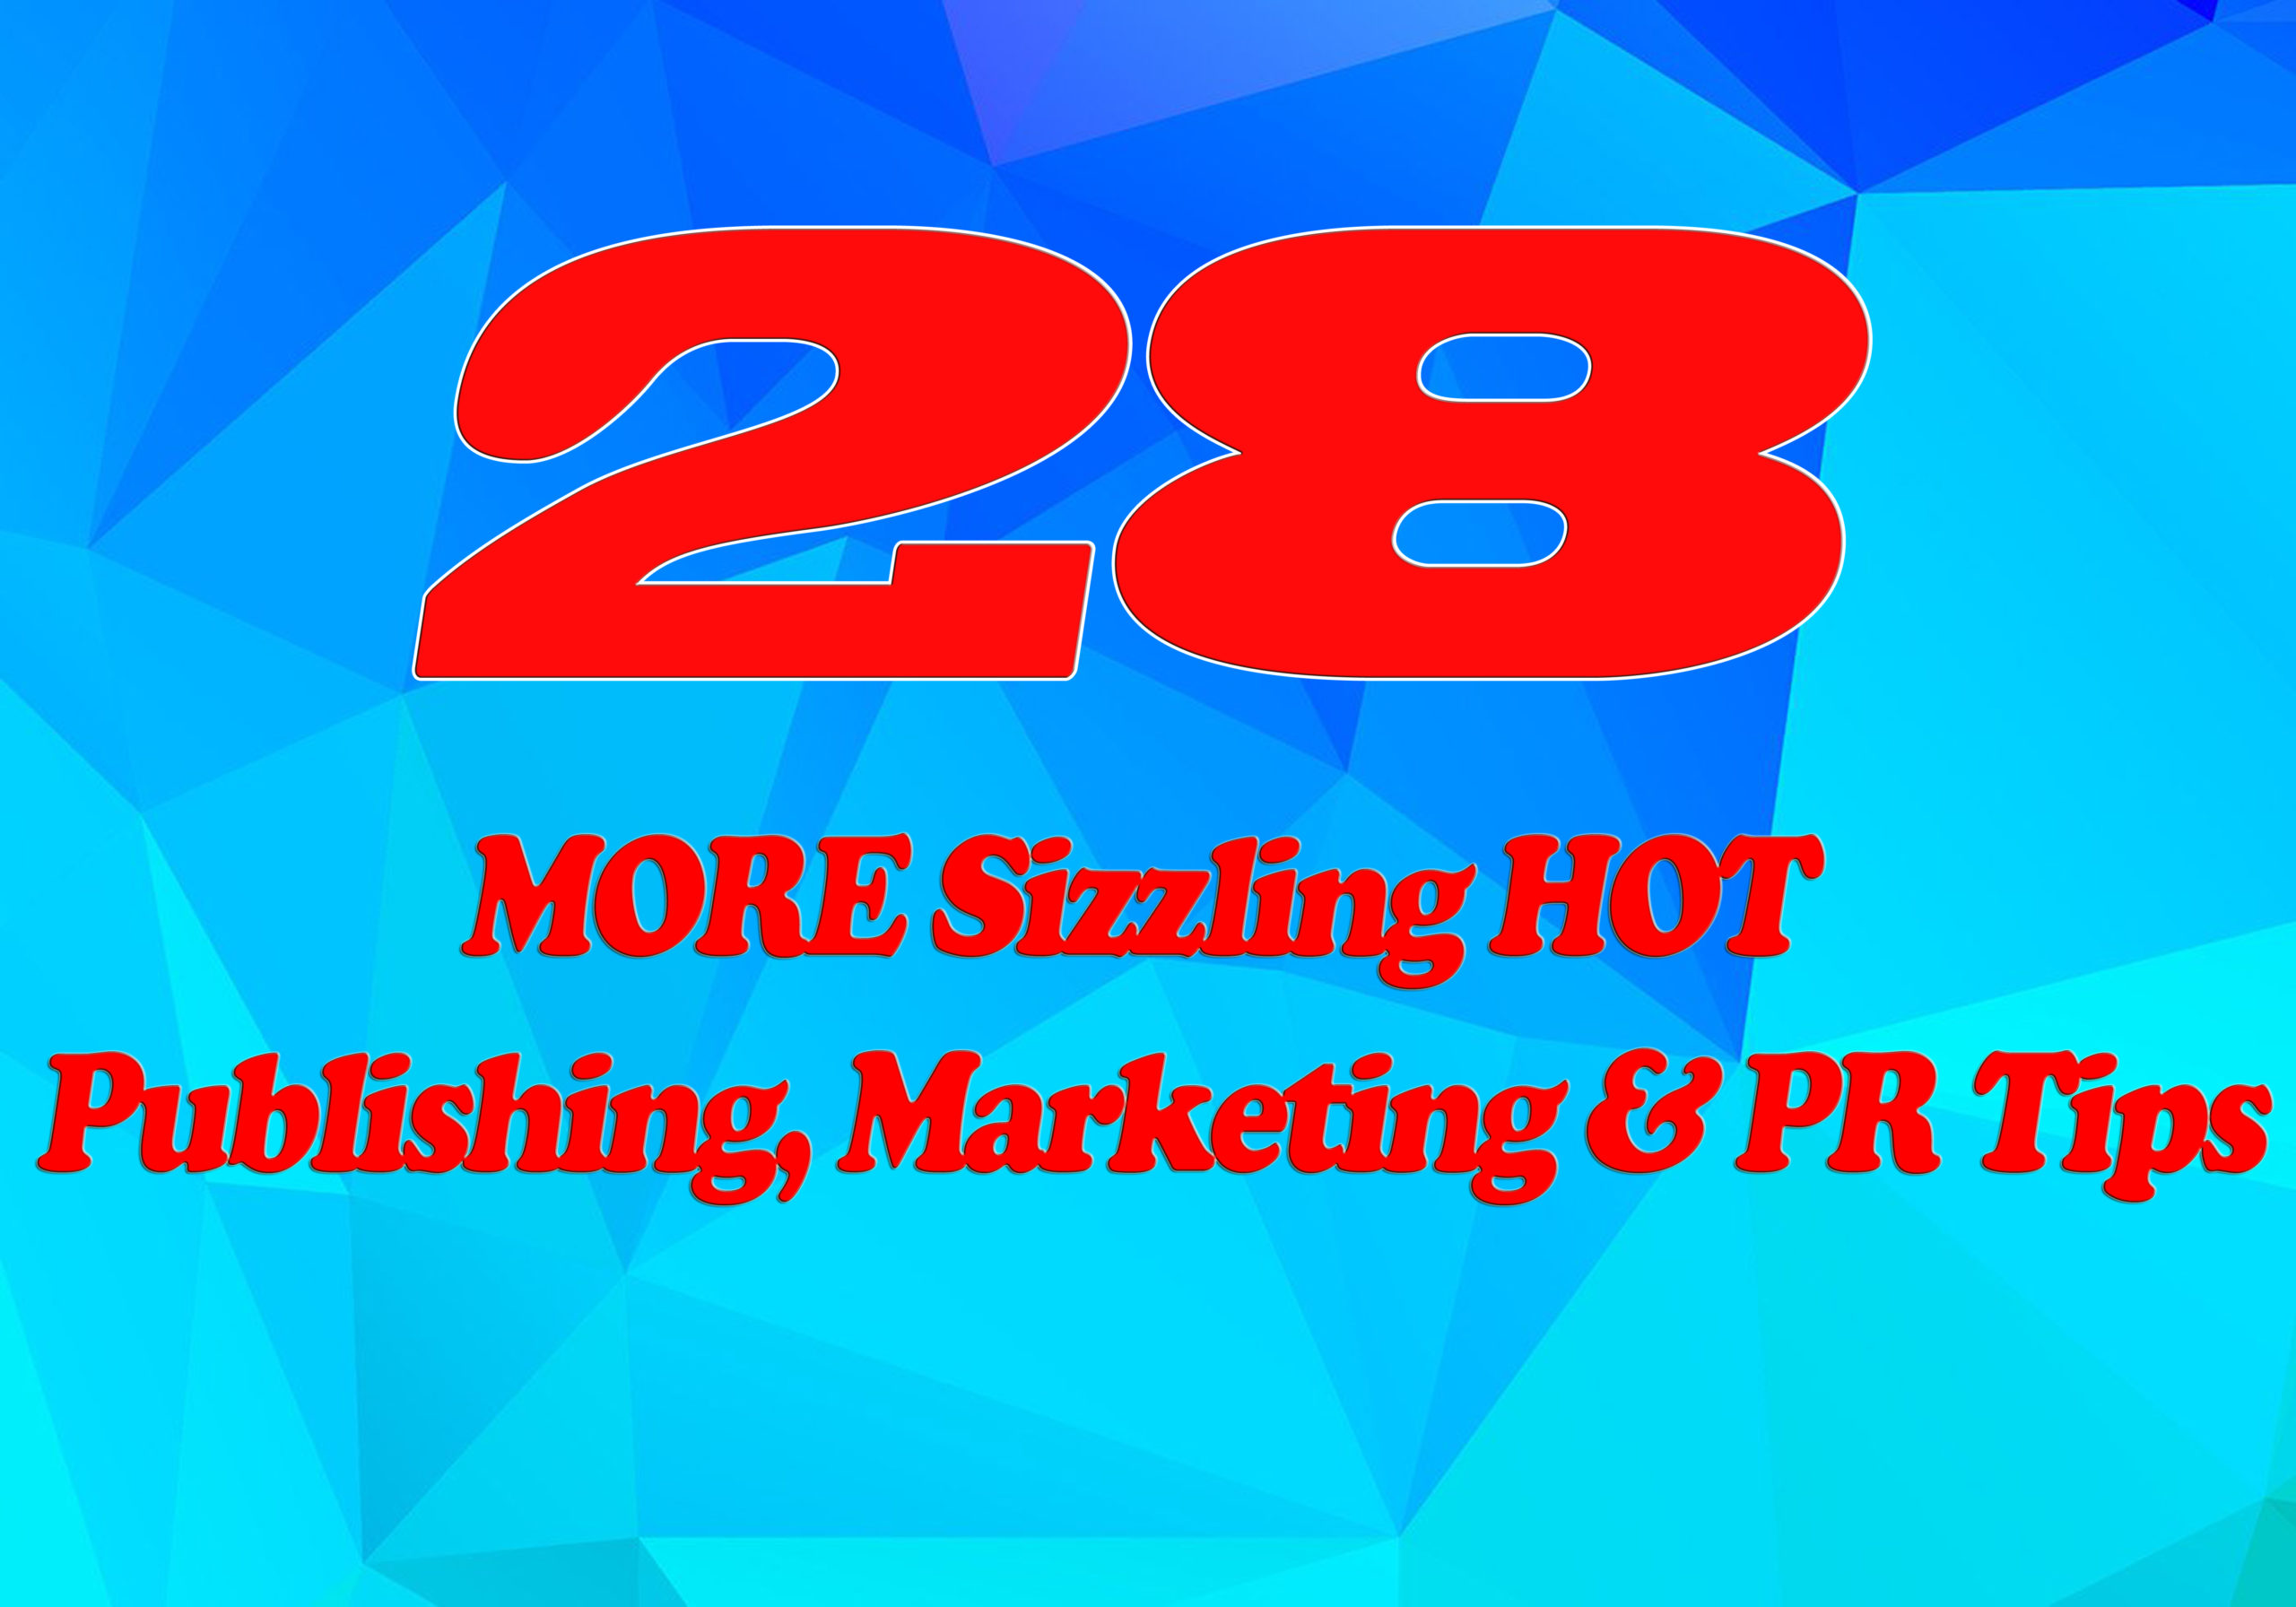 Get 28 MORE Sizzling HOT Publishing, Marketing & PR Tips in only one hour!